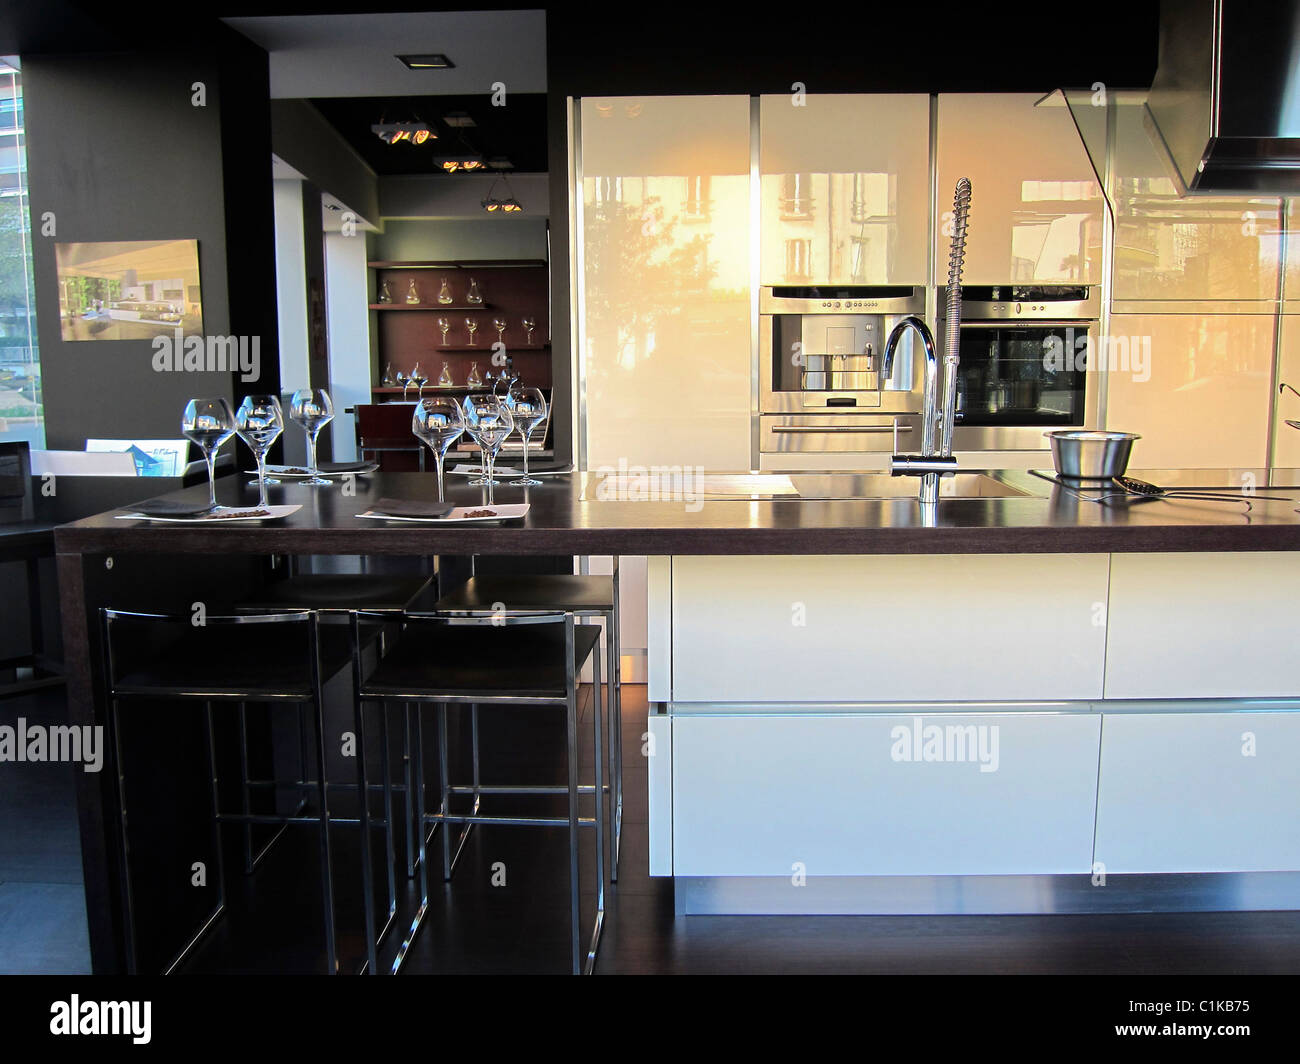 France, Modern Kitchen Design Store, Display 'Nella Cucina' france finished products Stock Photo